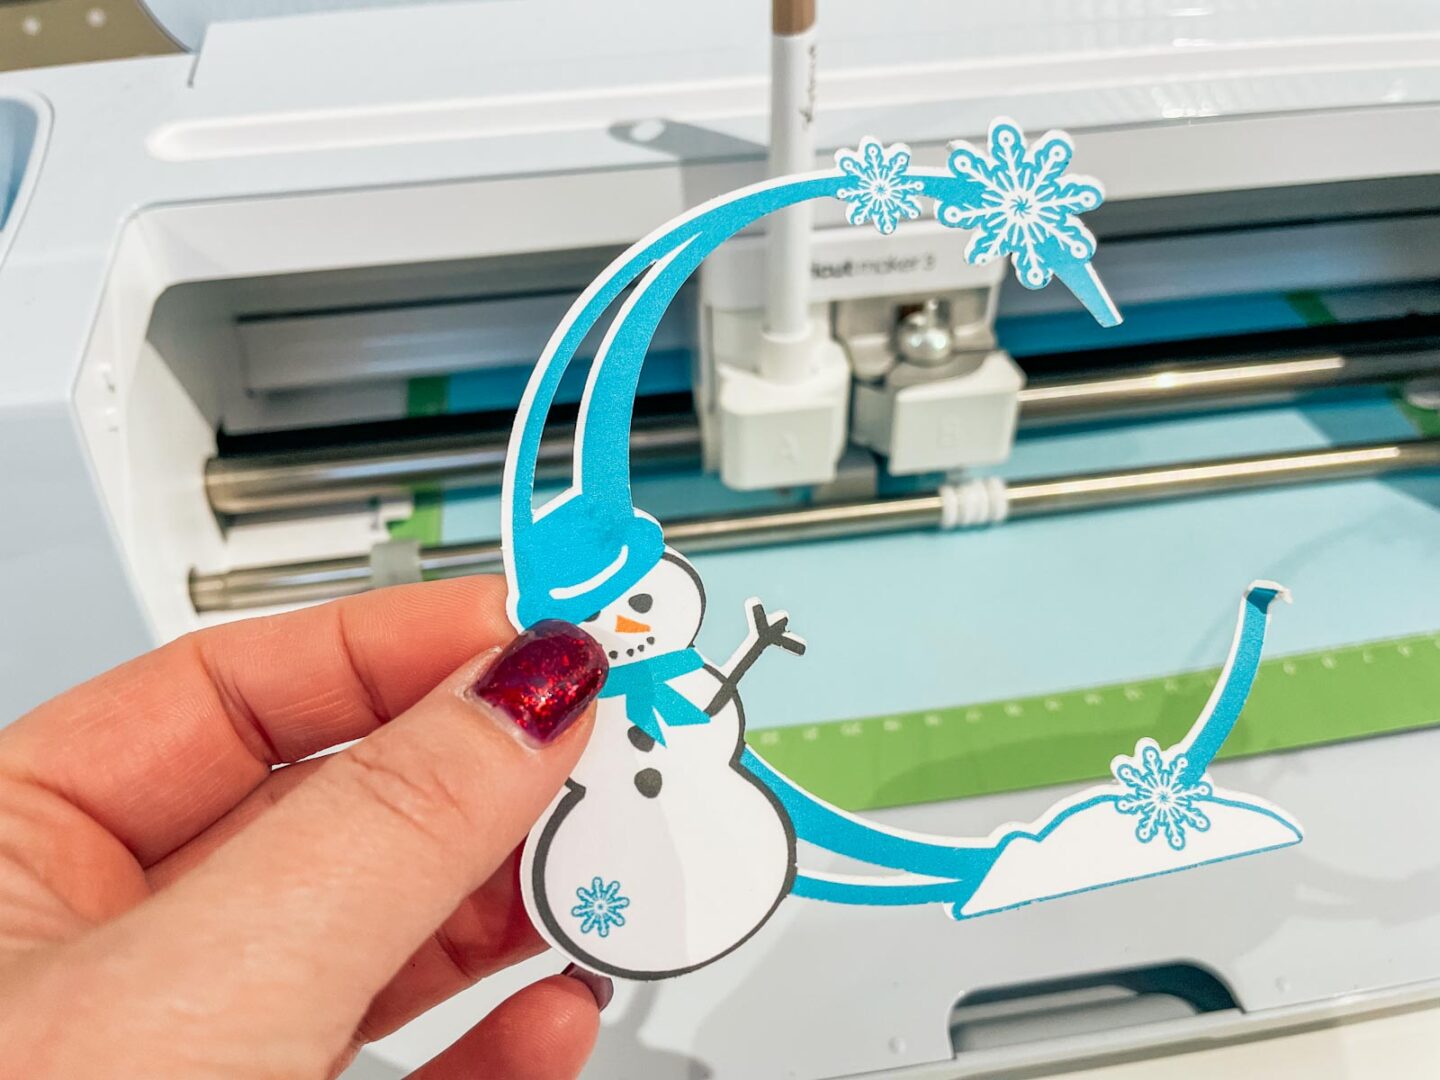 Print out your Snowman letters